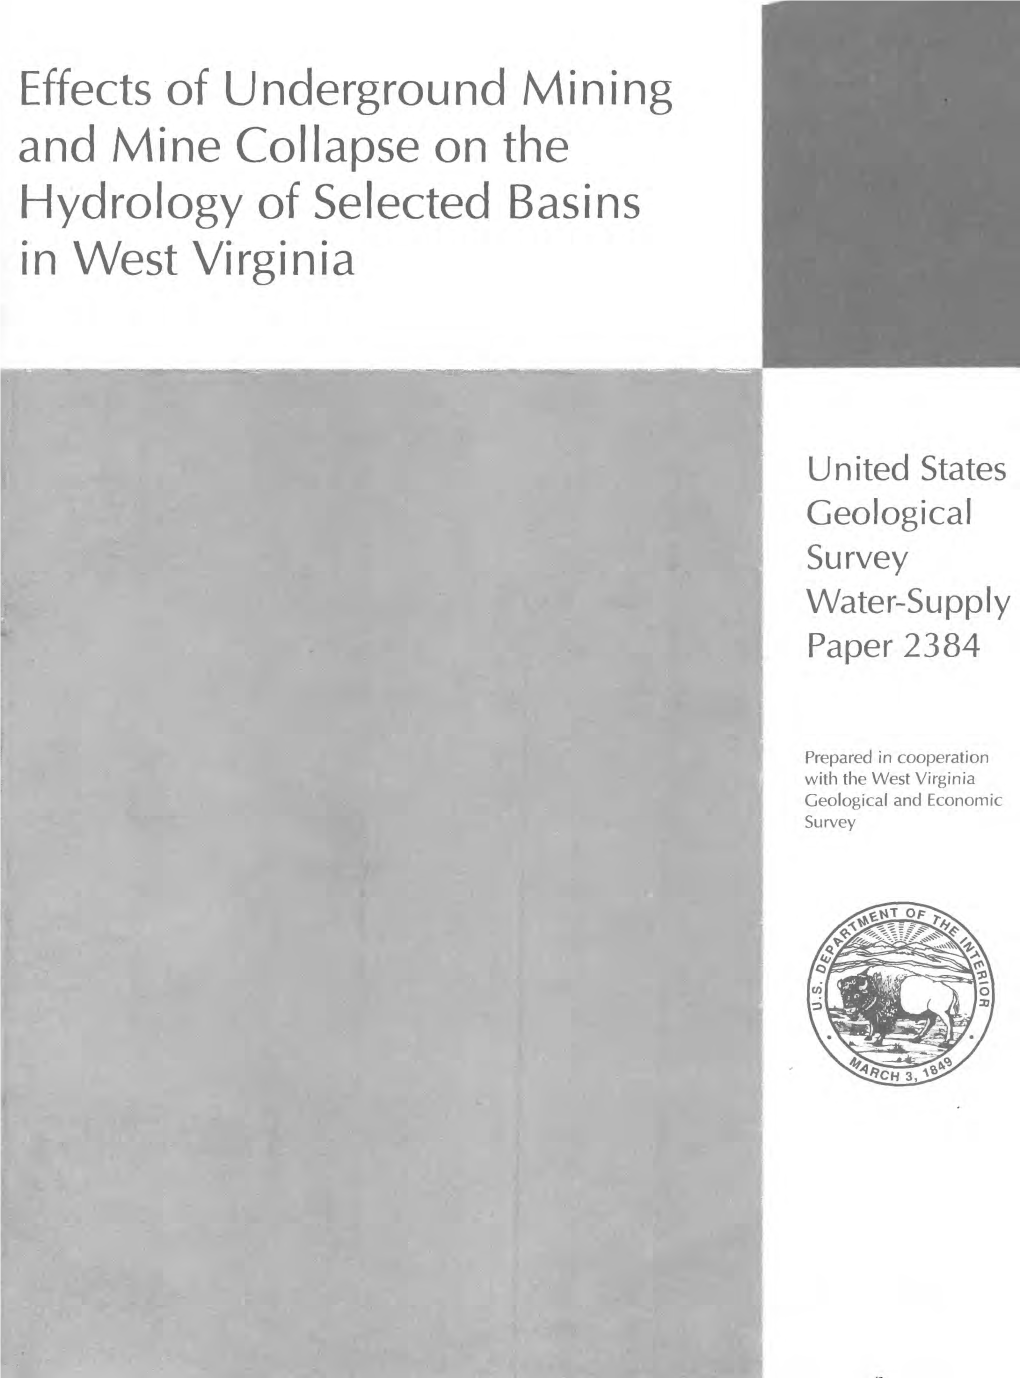 Effects of Underground Mining and Mine Collapse on the Hydrology of Selected Basins in West Virginia